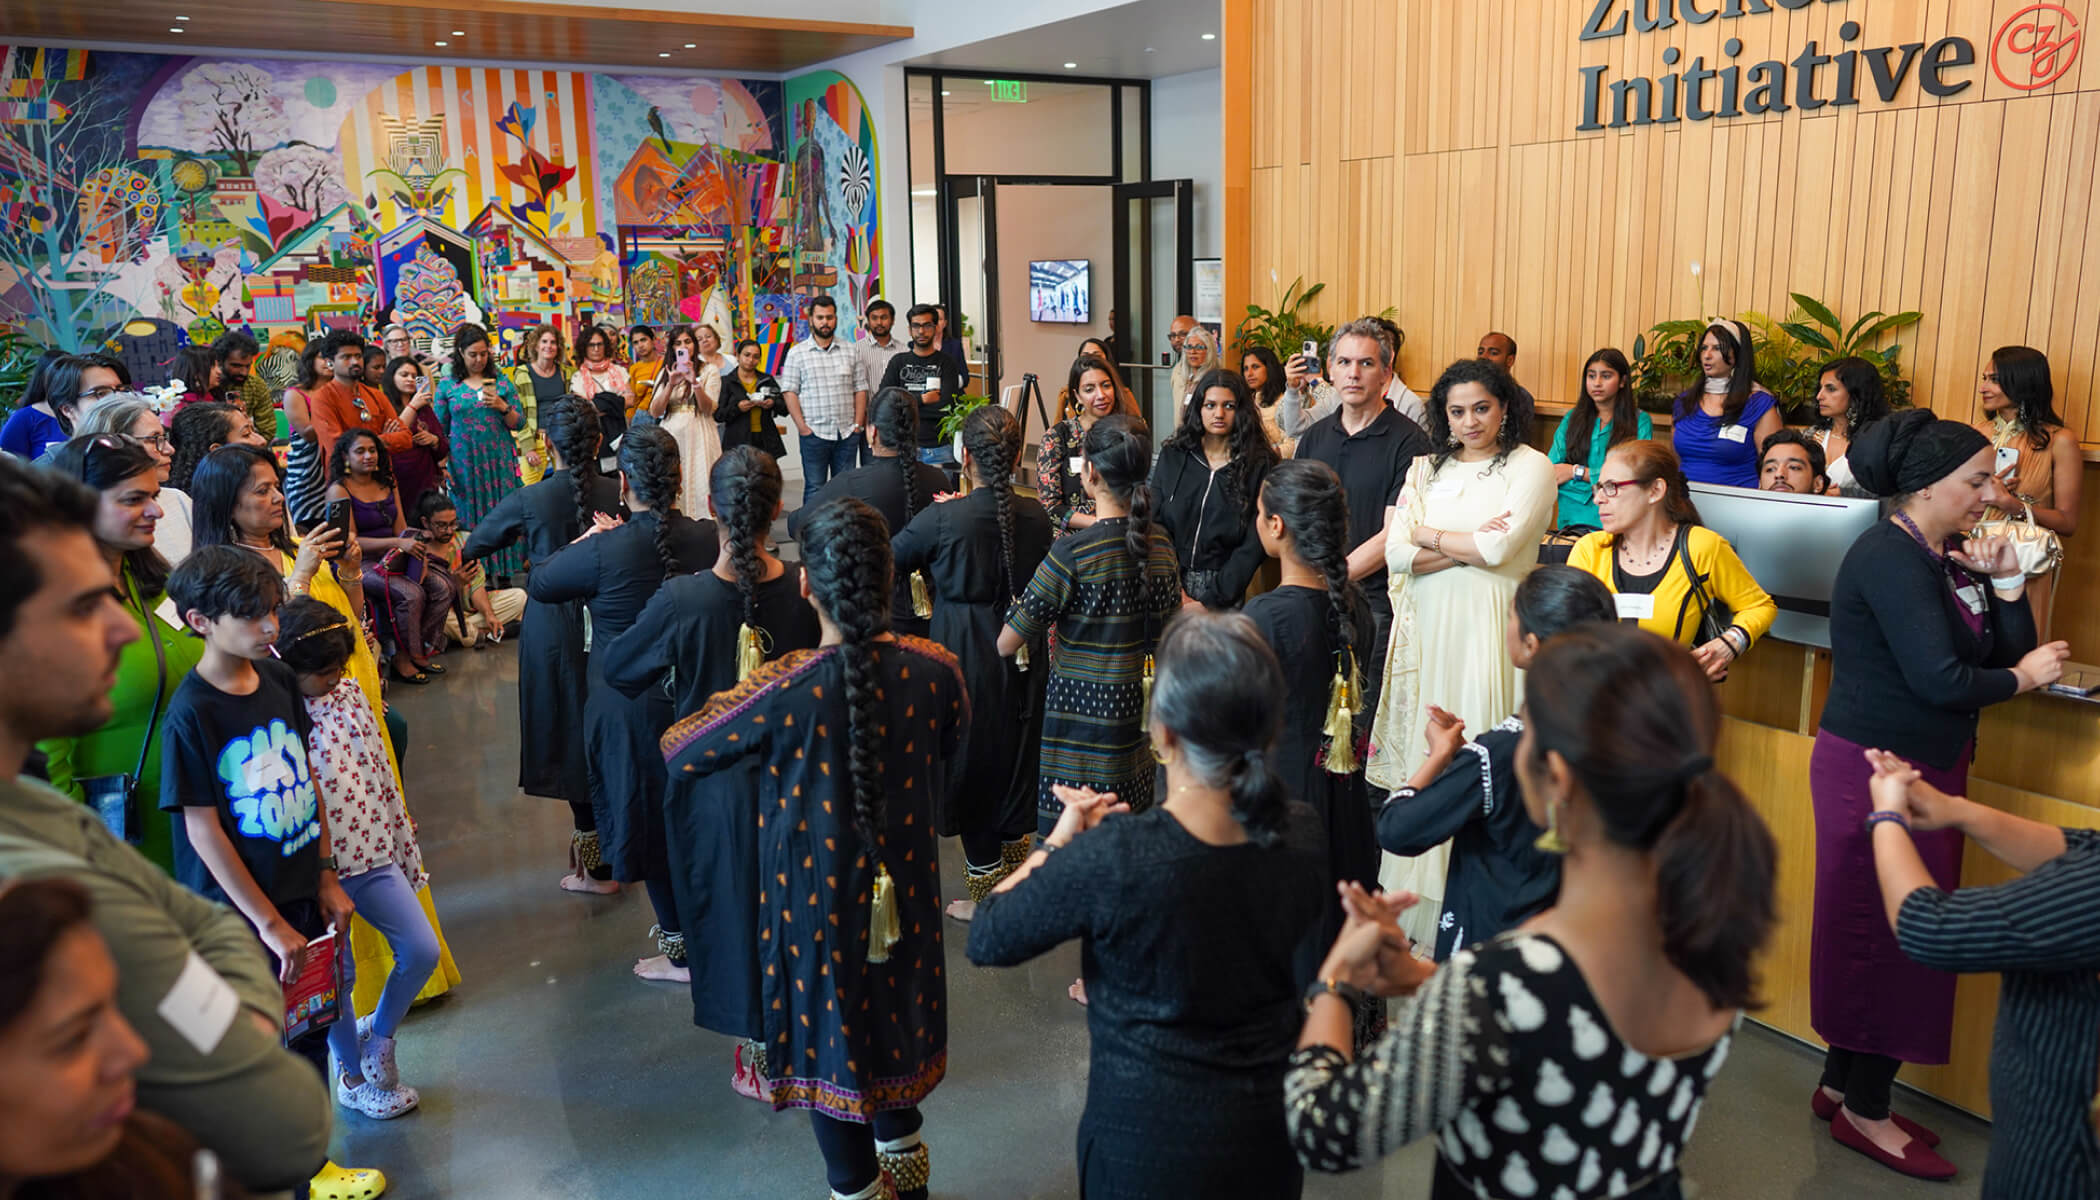 A group of women in Black, traditional South Asian attire dance in unison through a lobby. “Chan Zuckerberg Initiative” is on the wall.